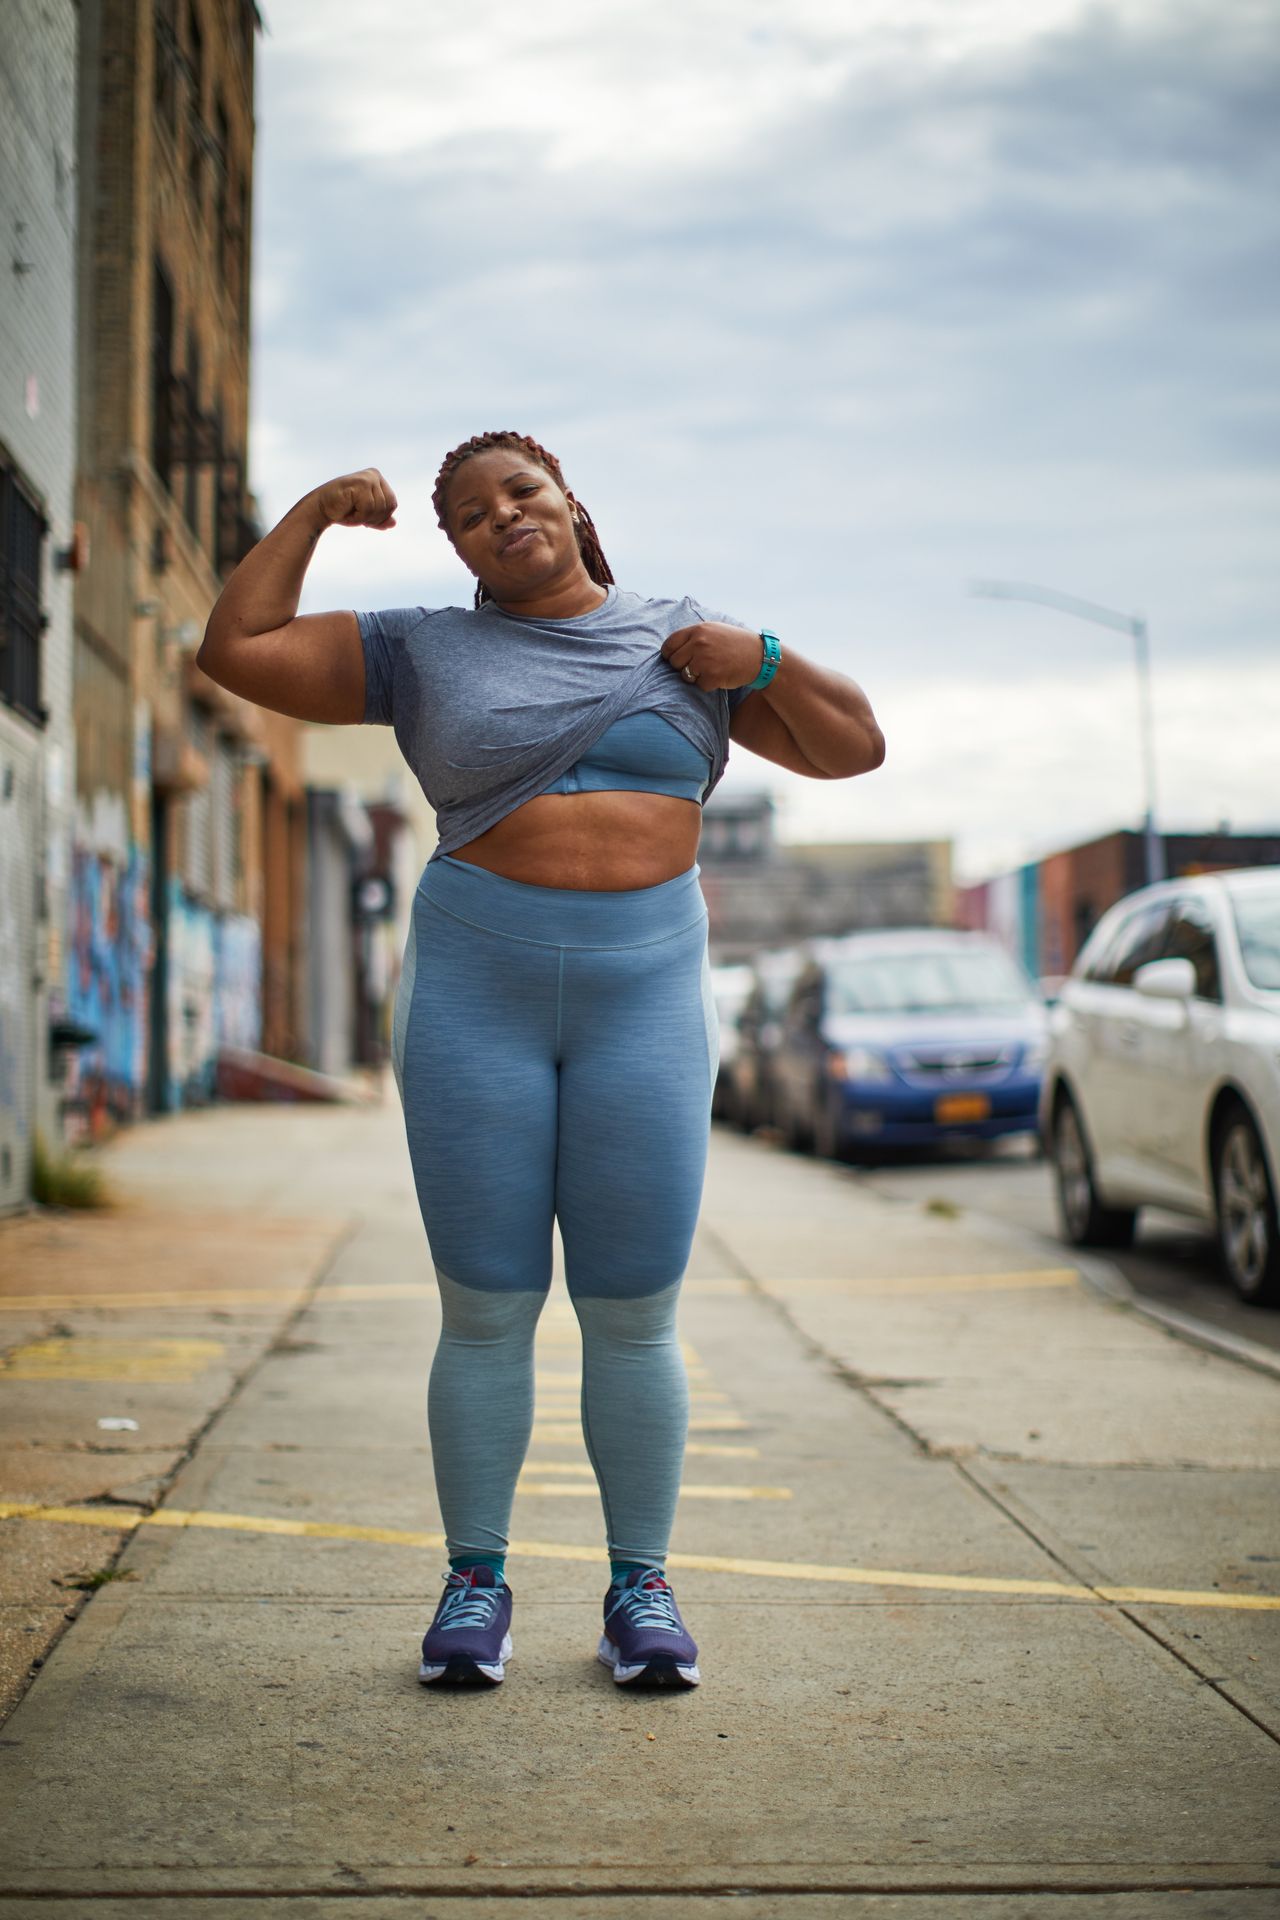 Last September, Snell collaborated with HOKA ONE ONE running shoe company to discuss aspects of her fitness journey and share some of the vile comments that she receives in her inboxes on a regular basis.